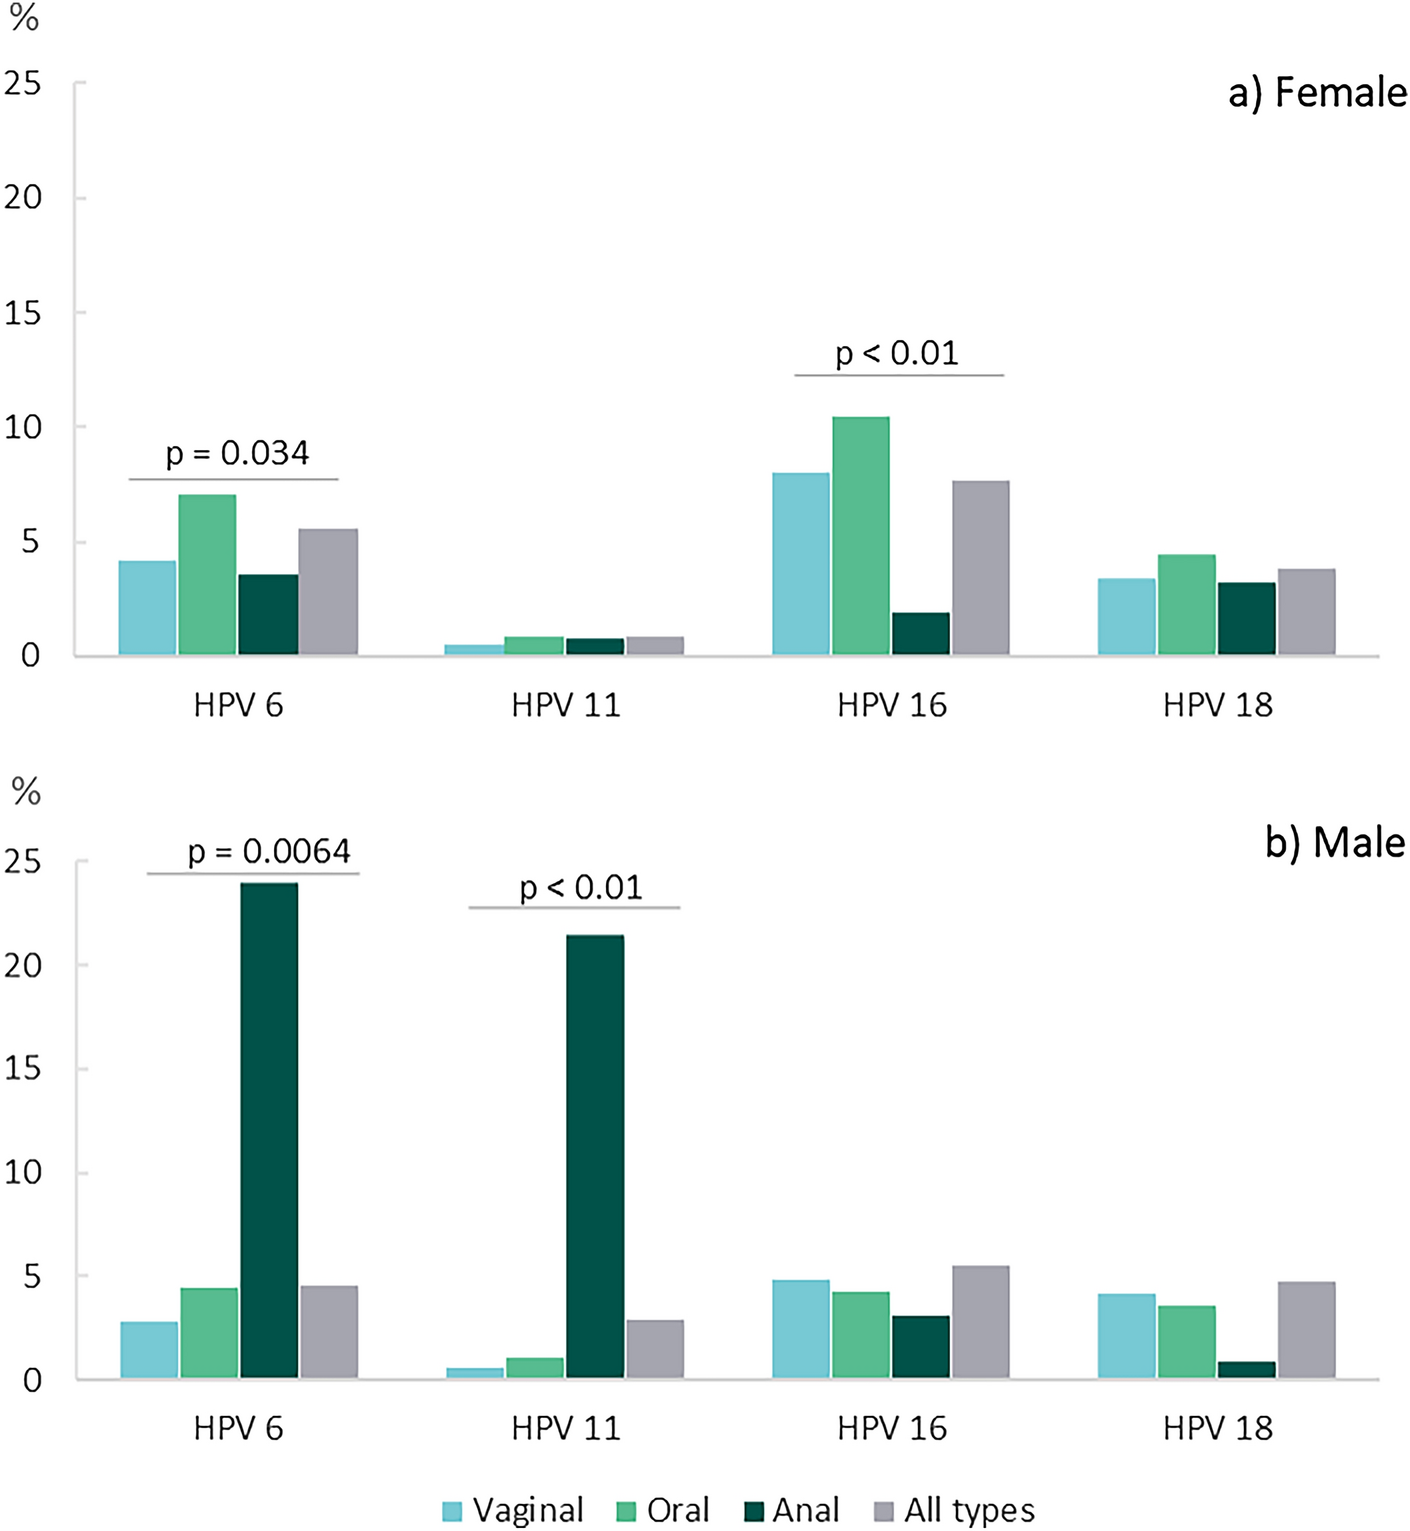 Sexual practices and HPV infection in unvaccinated young adults |  Scientific Reports